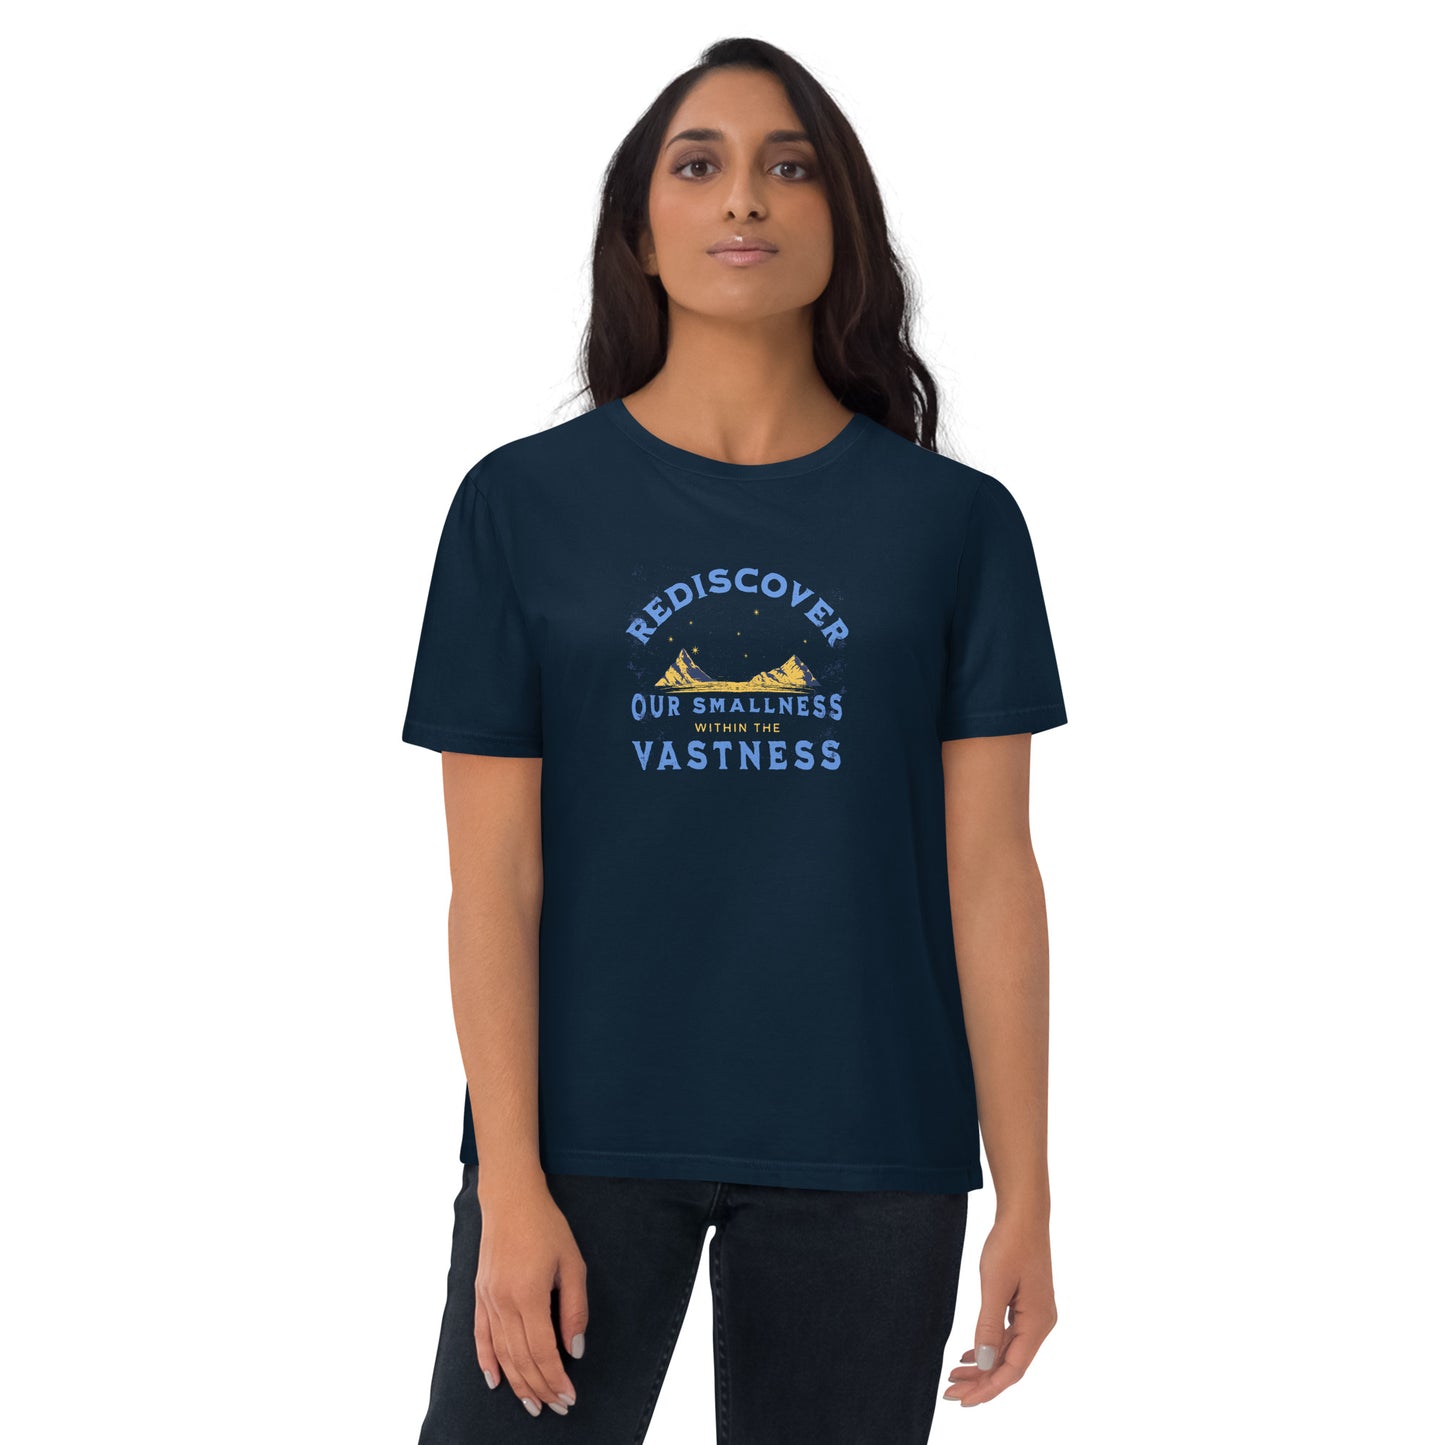 Unisex organic cotton t-shirt - Our Smallness In The Vastness